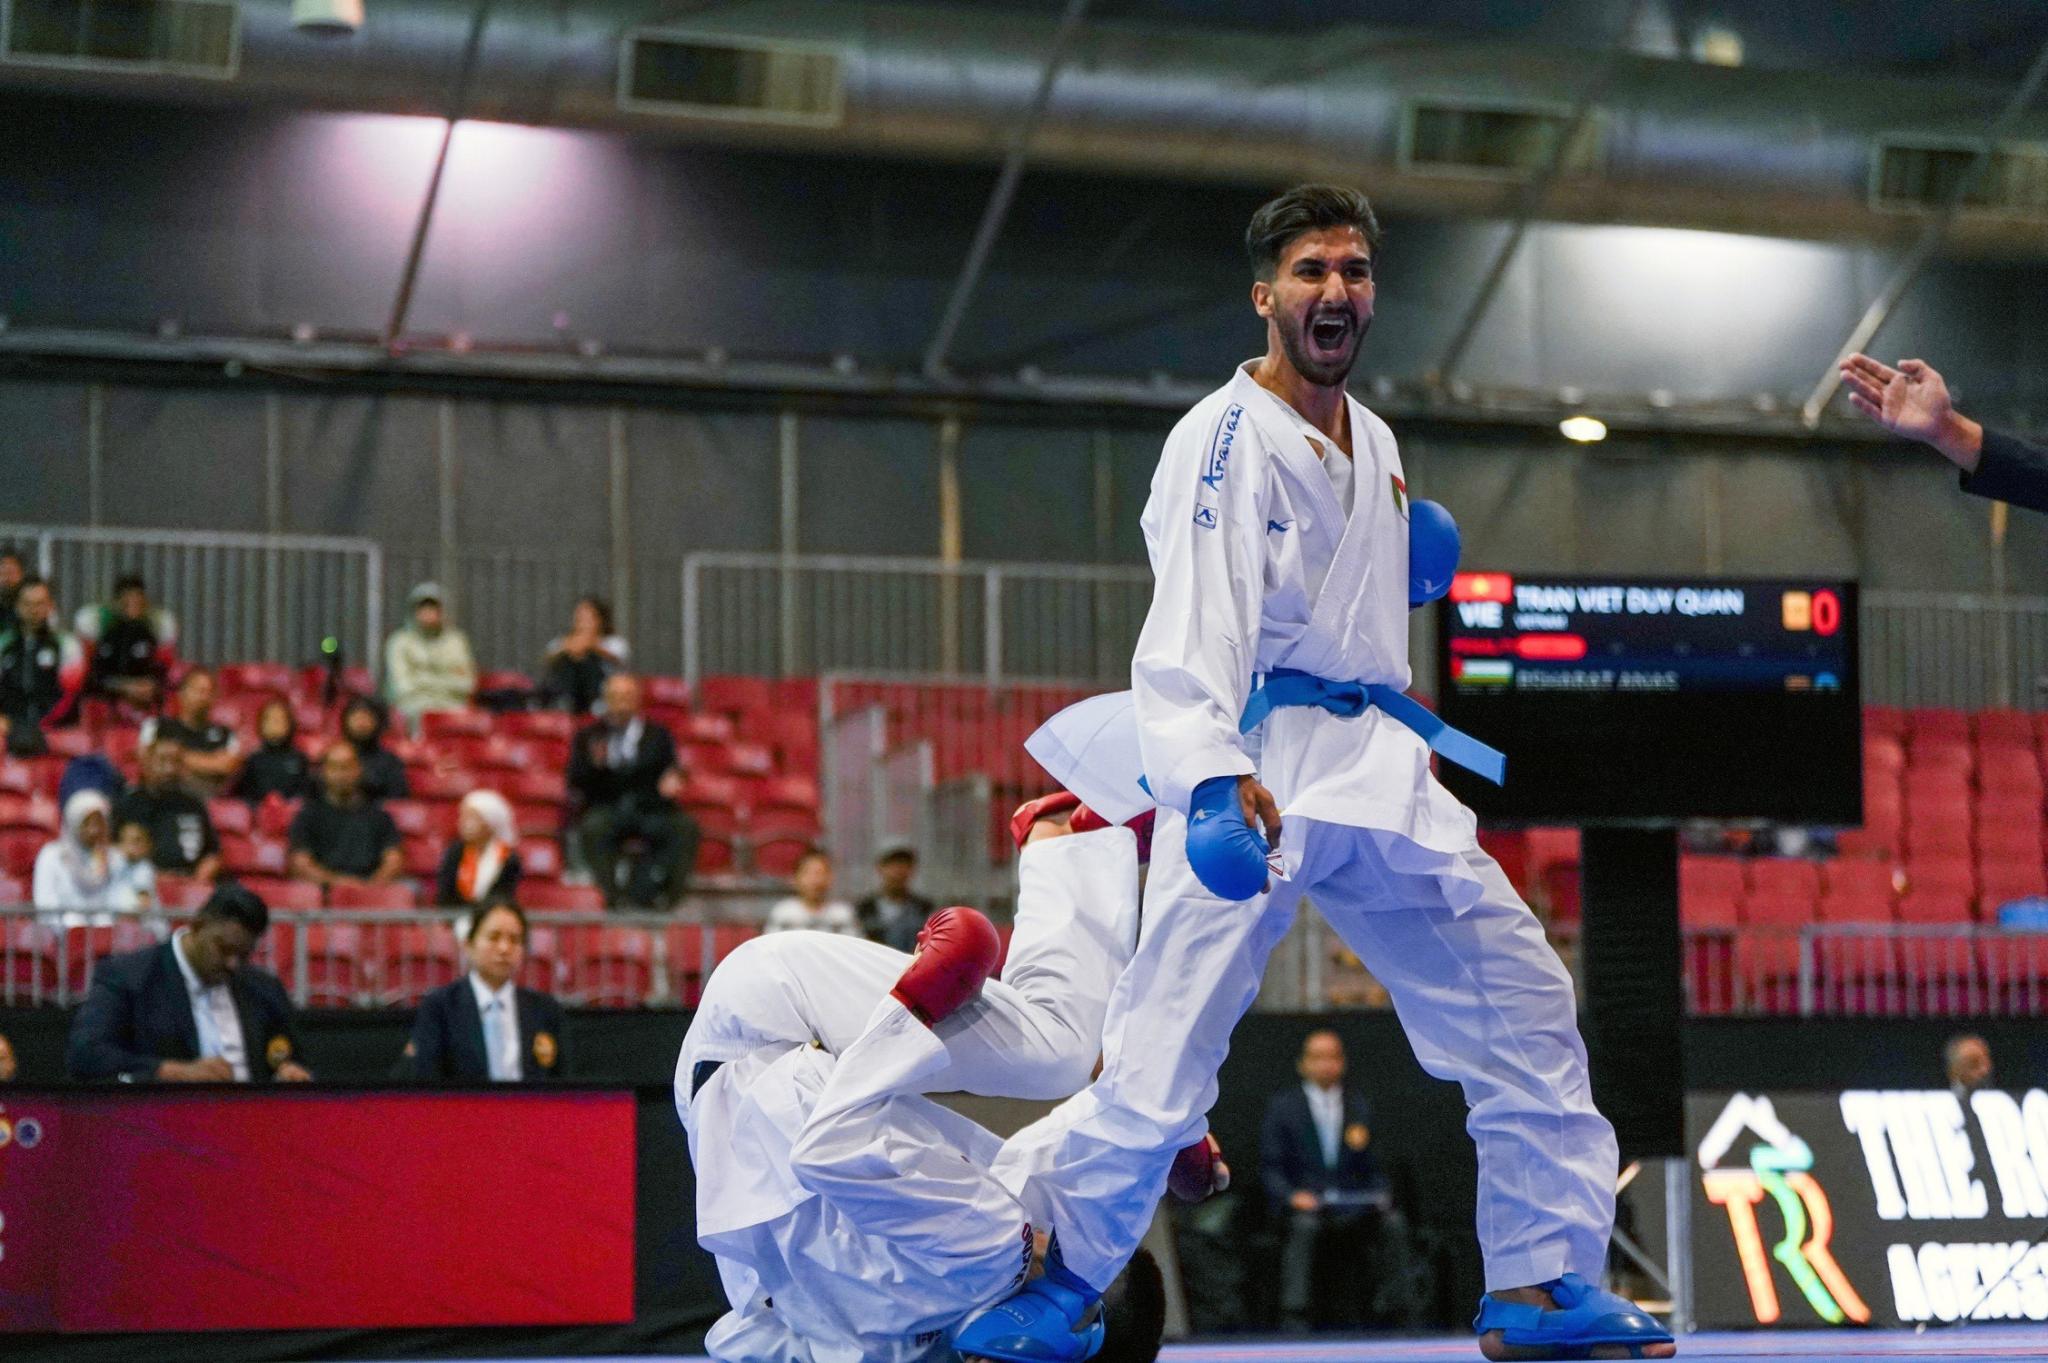 A student from the Faculty of Sport Sciences at the Arab American University Wins the Gold Medal in the West Asian Karate Championship